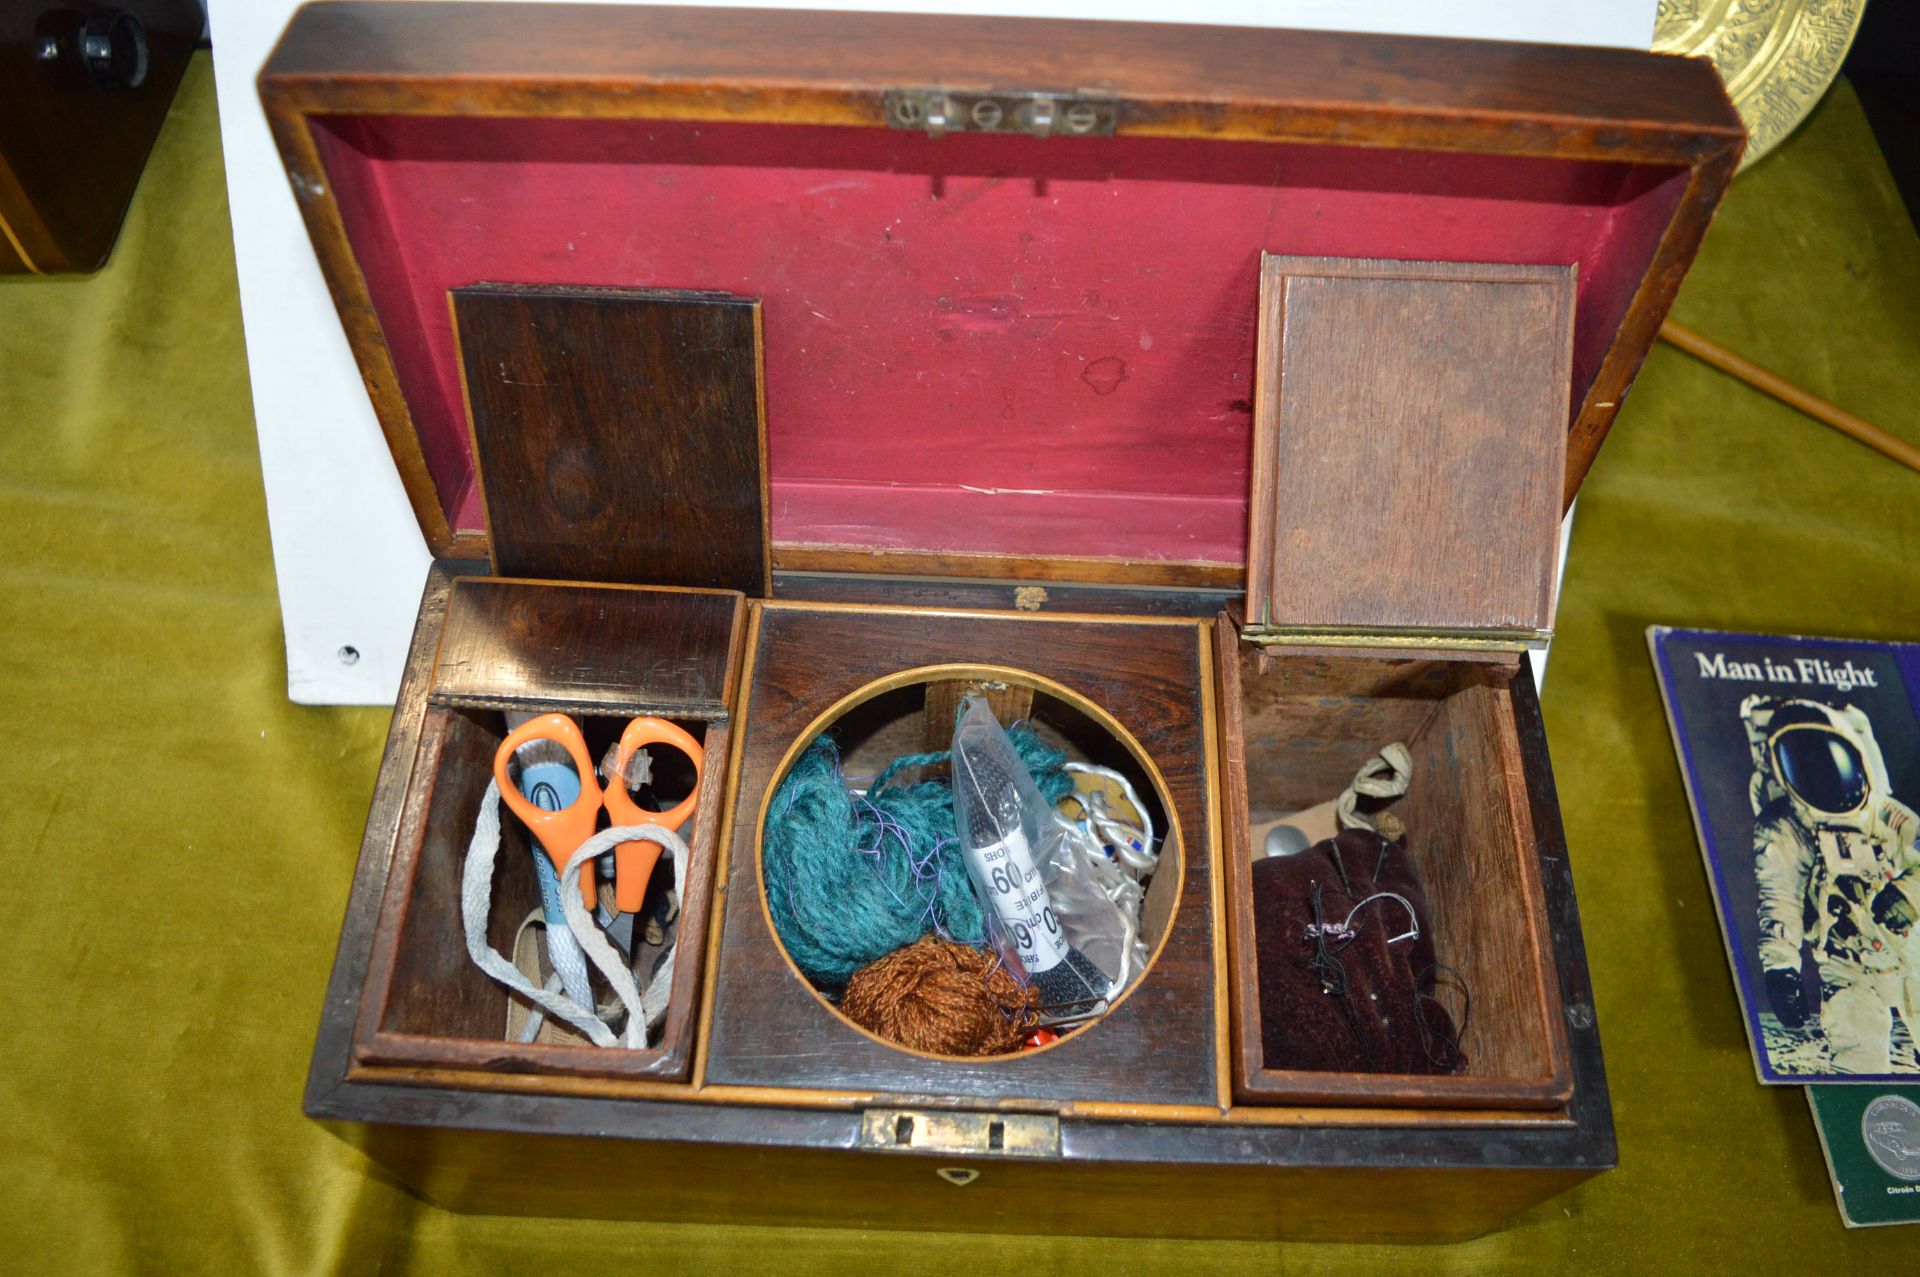 Antique Mahogany Tea Caddy and Sewing Accessories - Image 2 of 2